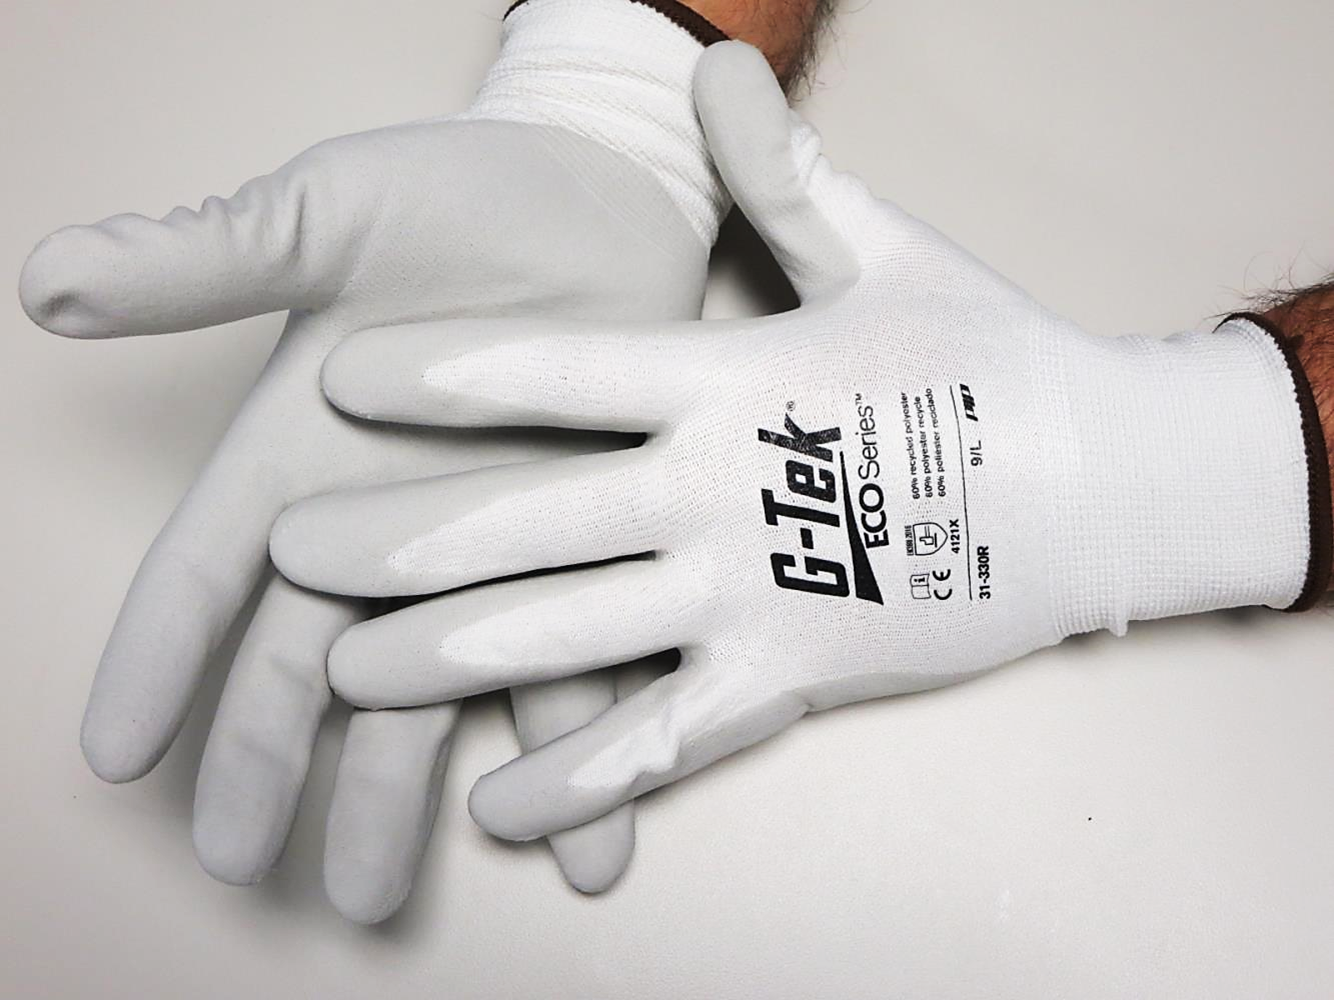 # 31 - 330 r PIP®G-Tek®生态ries™ Seamless Knit Recycled Yarn / Spandex Blended Glove with Nitrile Foam Coated Grip on Palm & Fingers